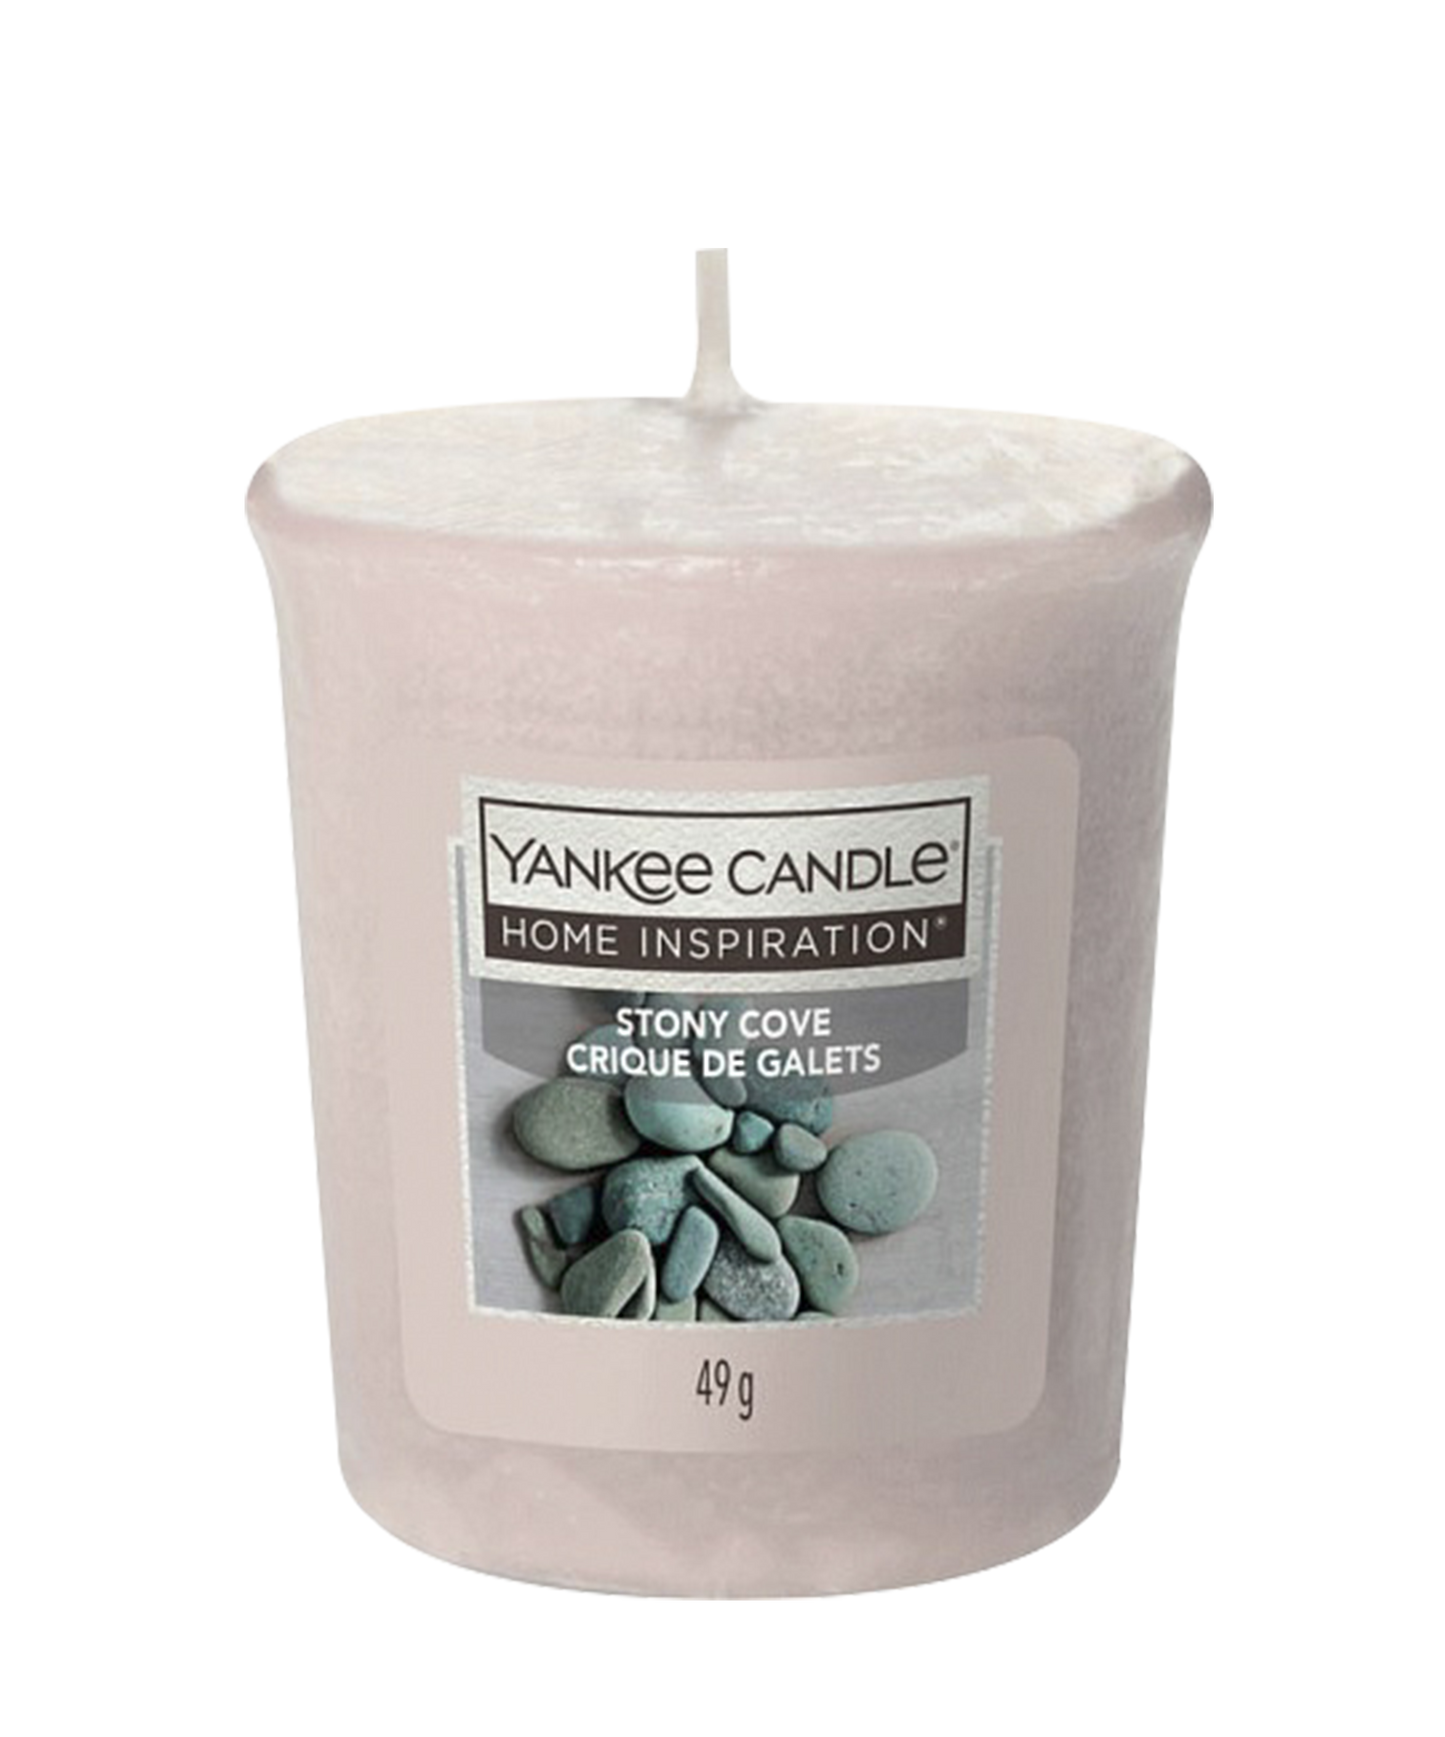 Stony Cove Votive Yankee Candle® Home Inspiration® Stony Cove Scented Candle gives you a sense of serenity and relaxation. You will feel the living space as a quiet place by the water filled with the scent of sweet orange blossom and white musk. 